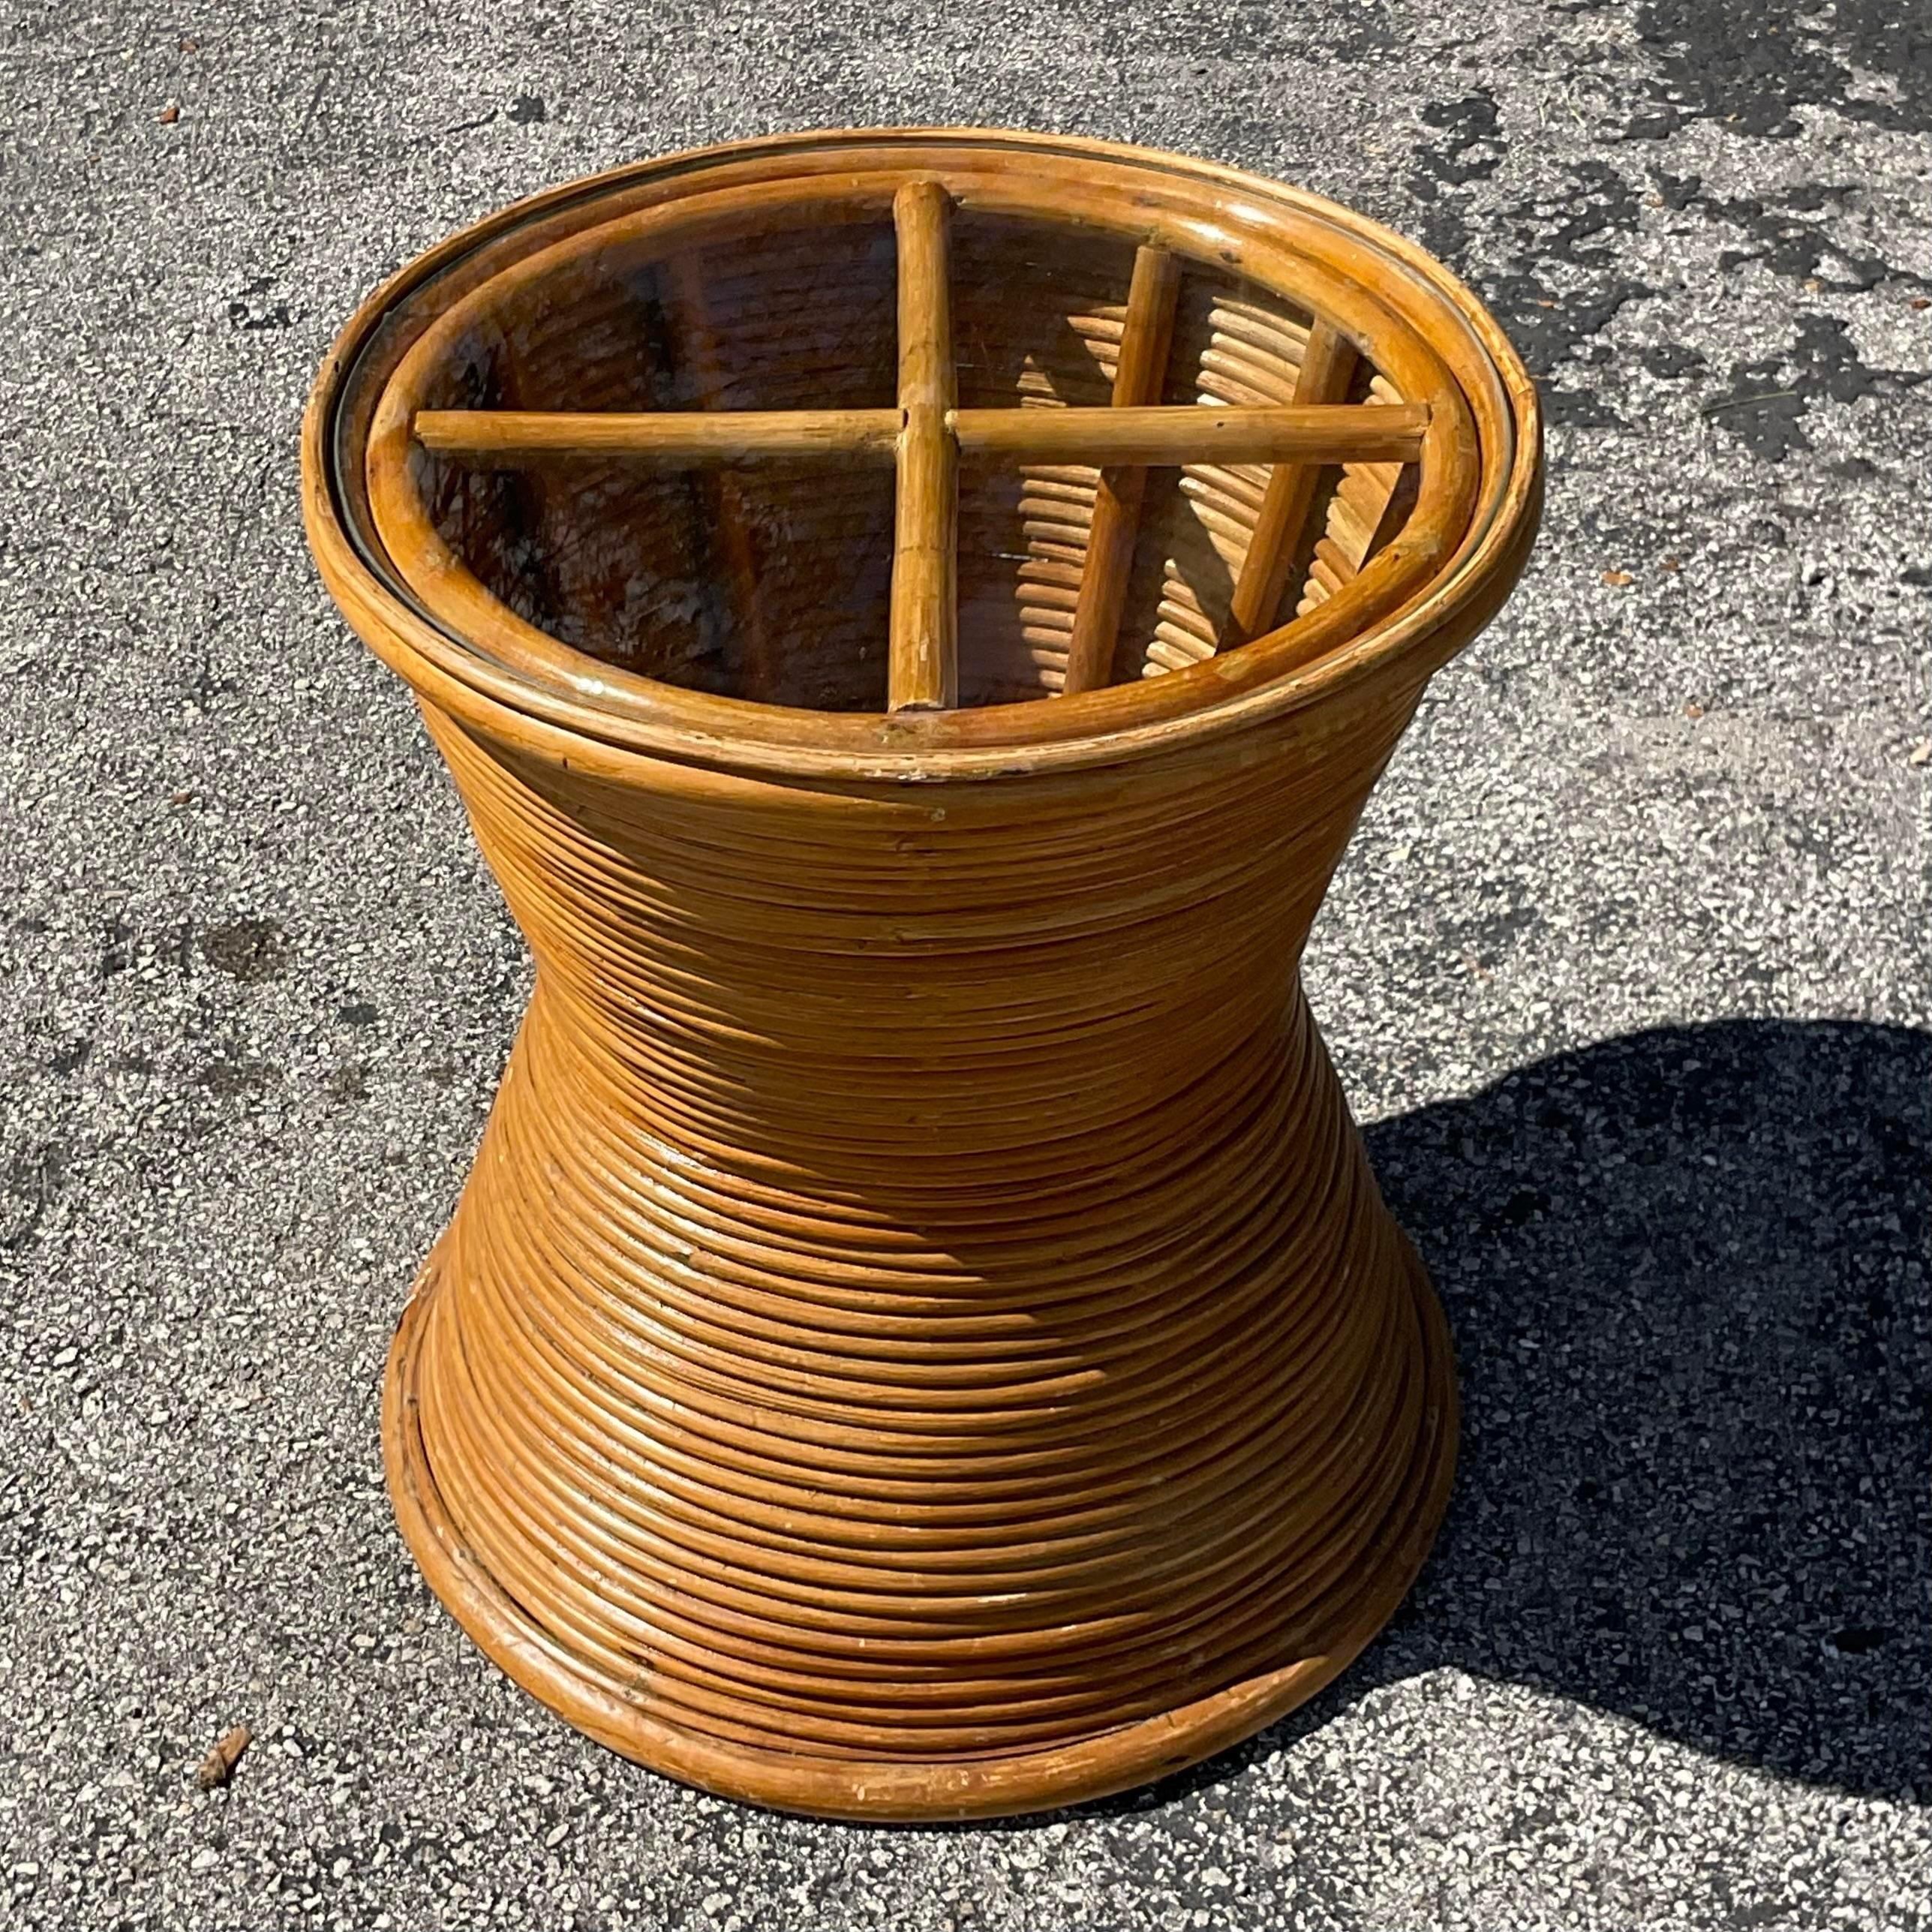 A fabulous vintage Coastal side table. A chic coiled pencil reed with an inset glass top. Perfect as a side table or pedestal for your favorite sculpture or even a plant stand. You decide! Acquired from a Palm Beach estate. 